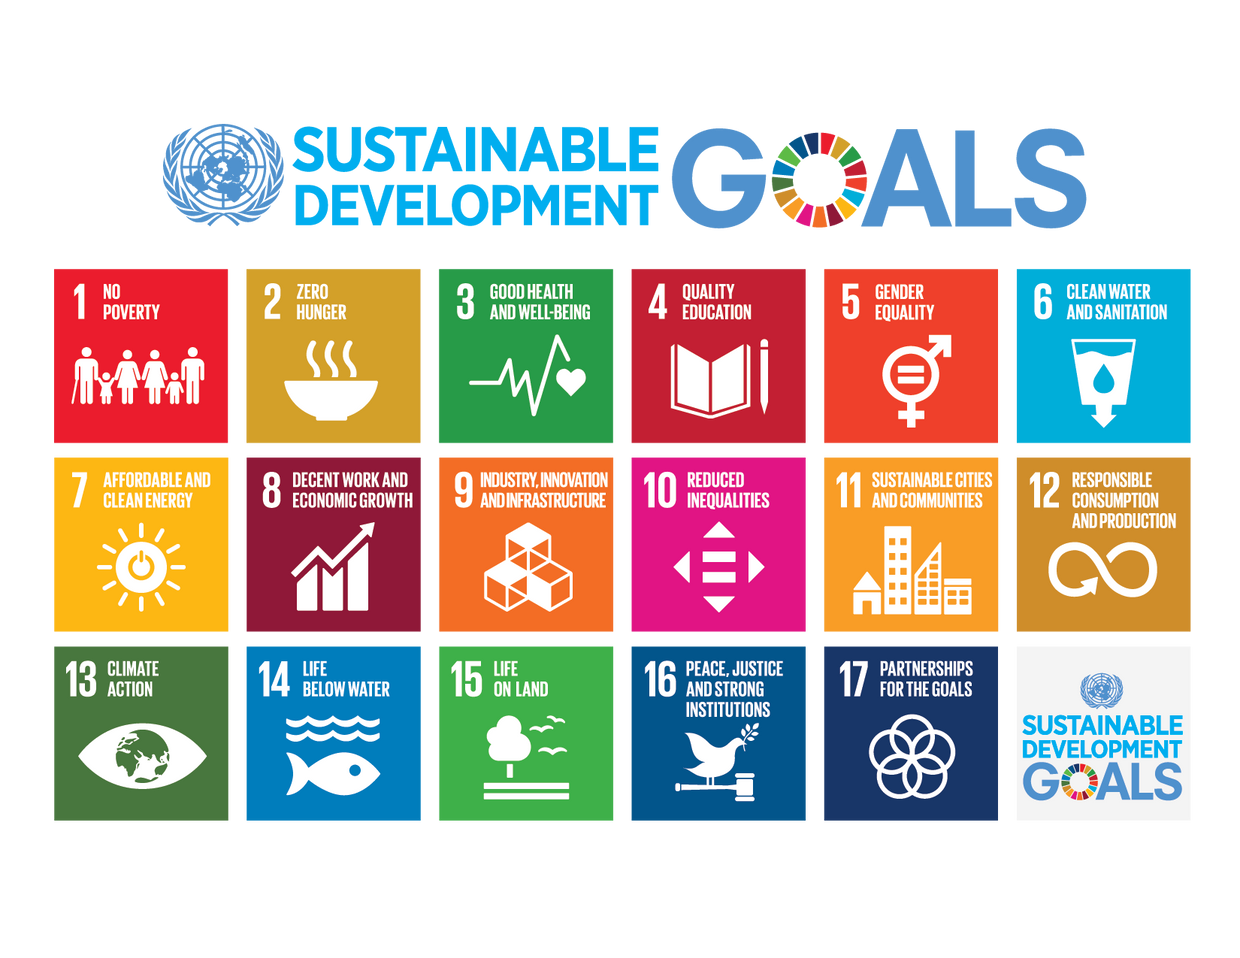 After learning basis of SDGs cover image